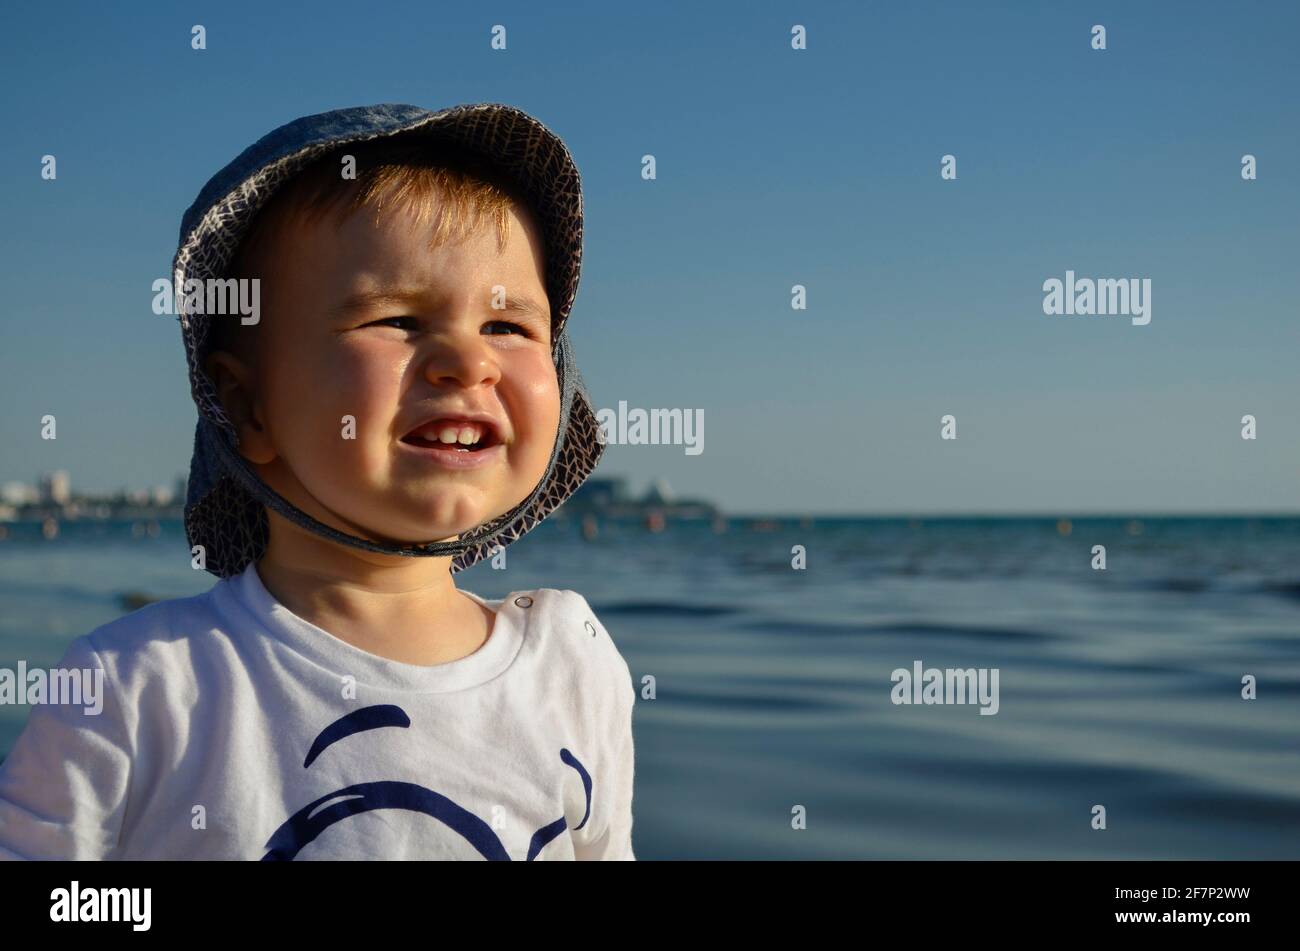 Emotional portrait of a child brightly lit. Looks concentrated, squints from the sun. Wearing a hat against the blue sea and sky, on the shore on a hot summer day. Stock Photo